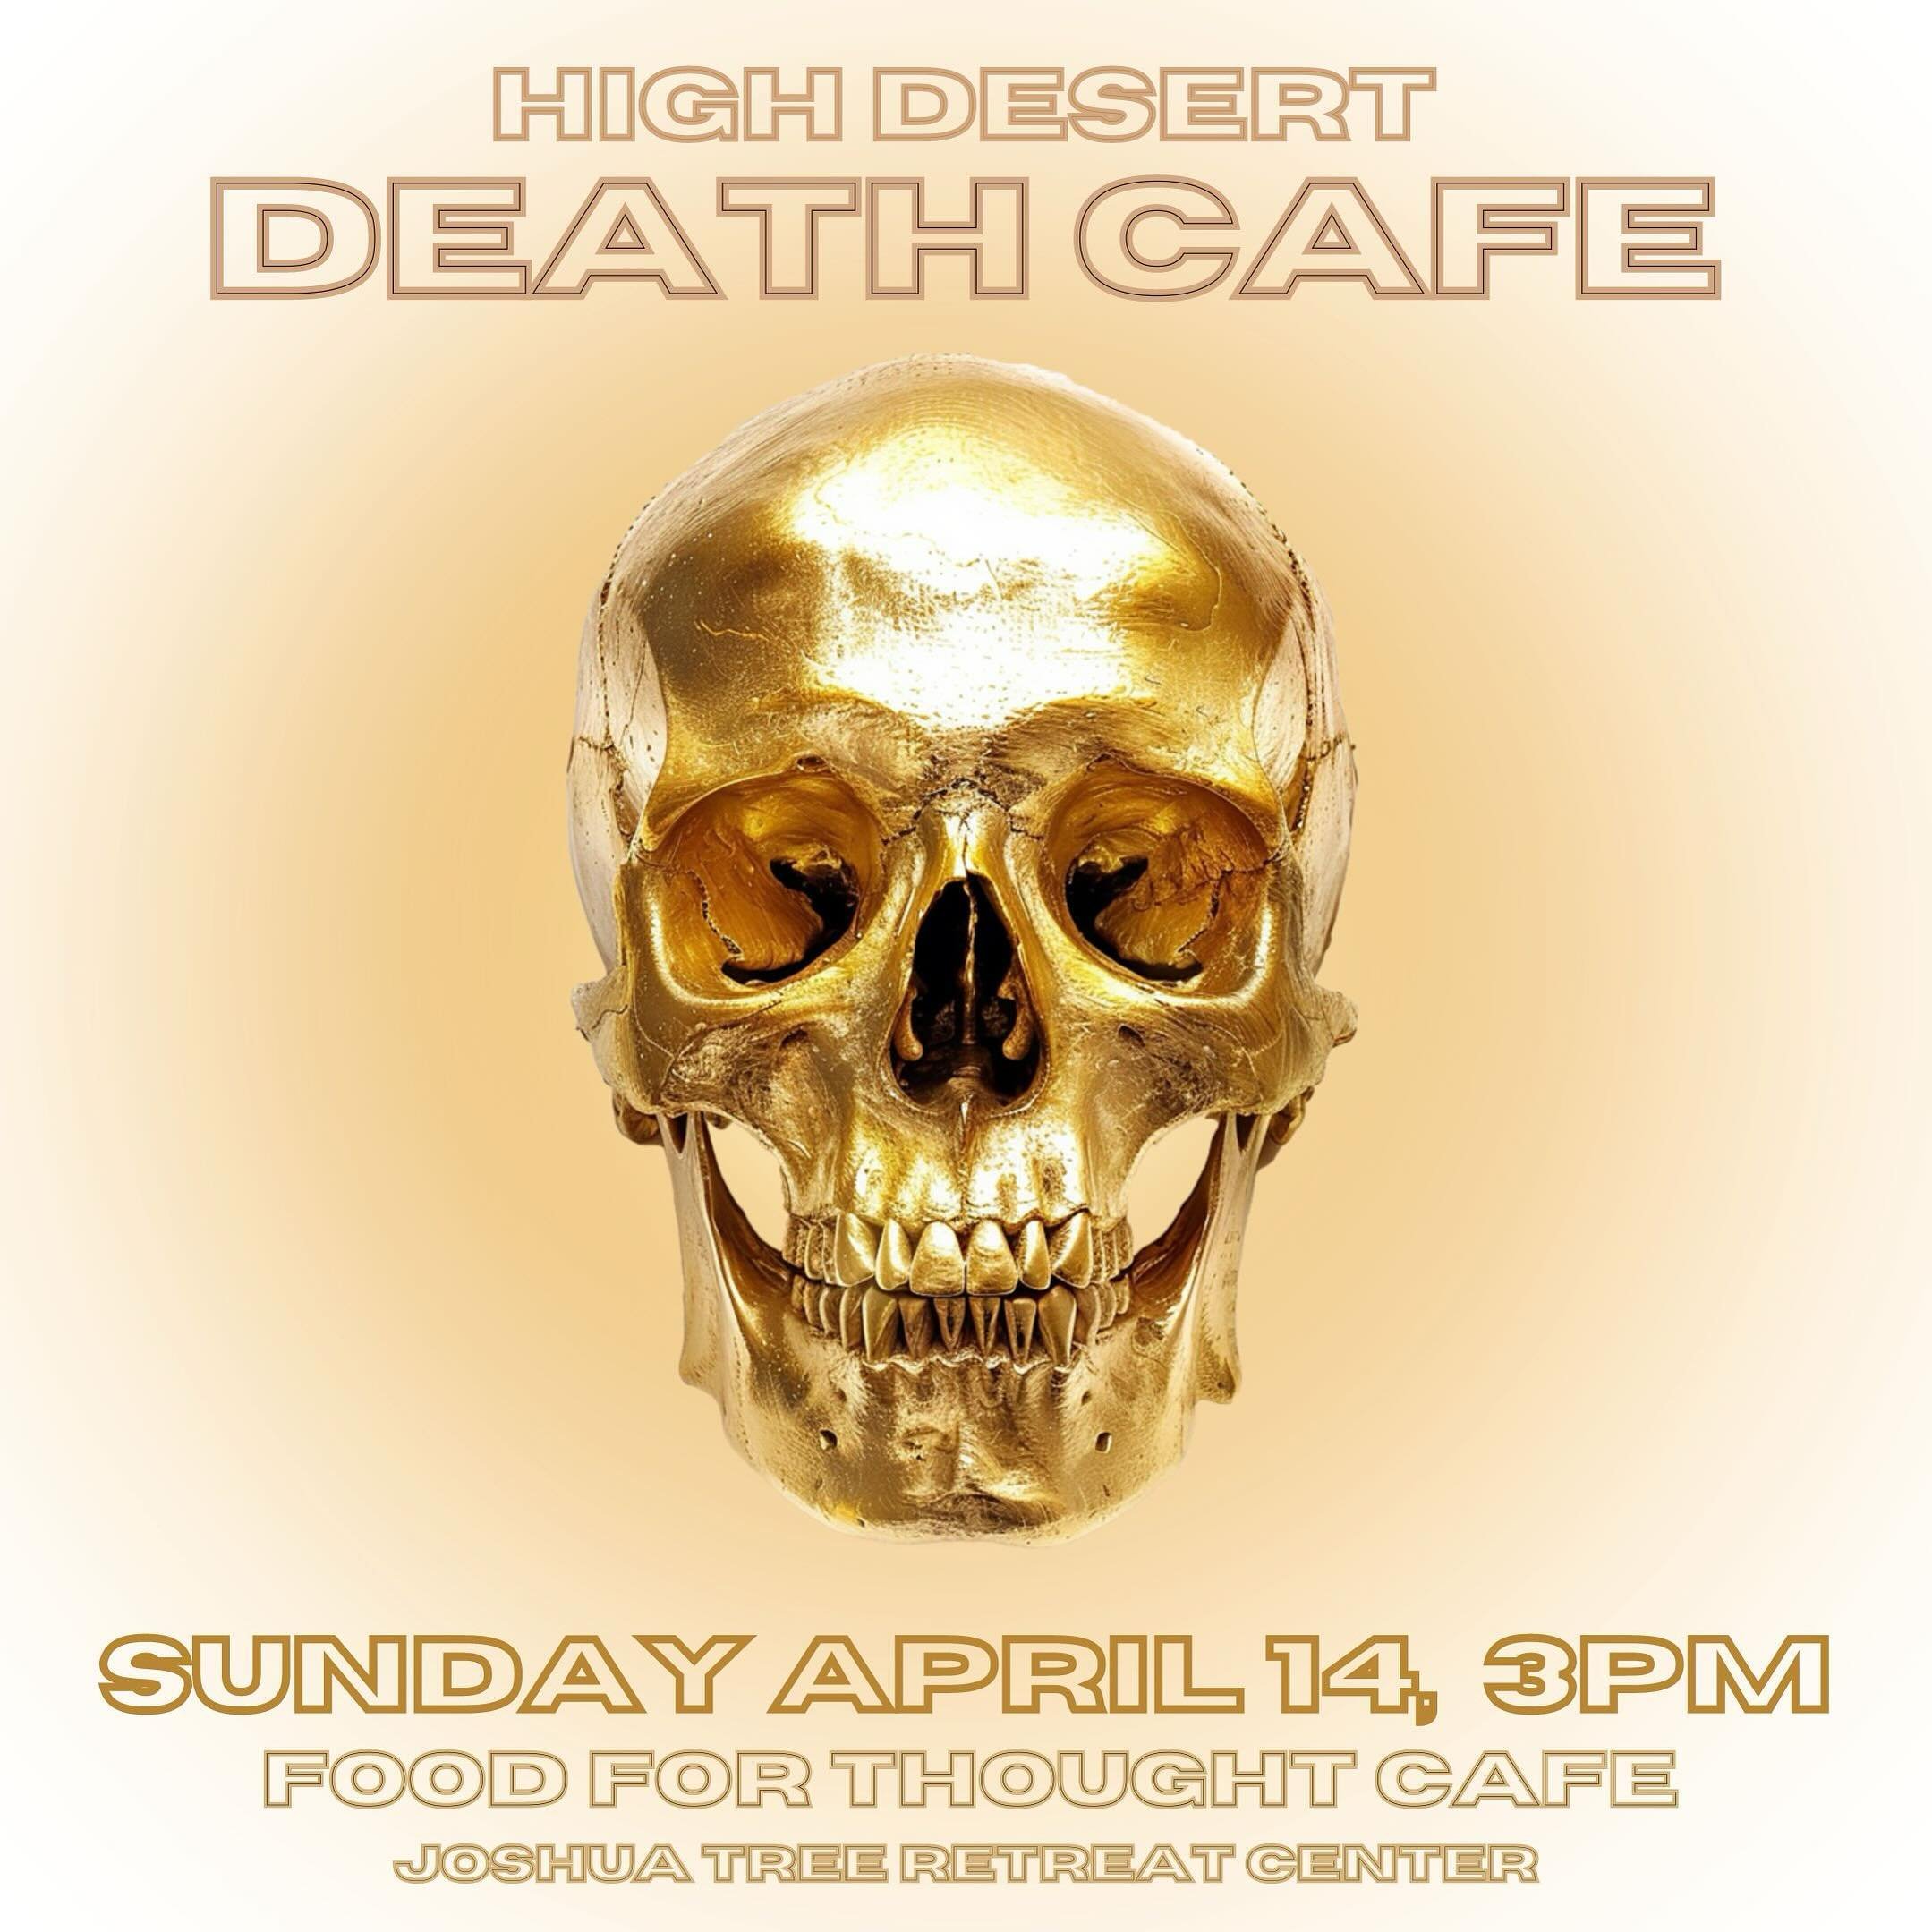 Join our next Death Cafe Sunday April 14, 3pm
Food for Thought Cafe @foodforthoughtcafejt 
Joshua Tree Retreat Center @jtretreatcenter 

Death Cafe&rsquo;s are a place for casual, candid group directed conversation about Death and Dying in its many f